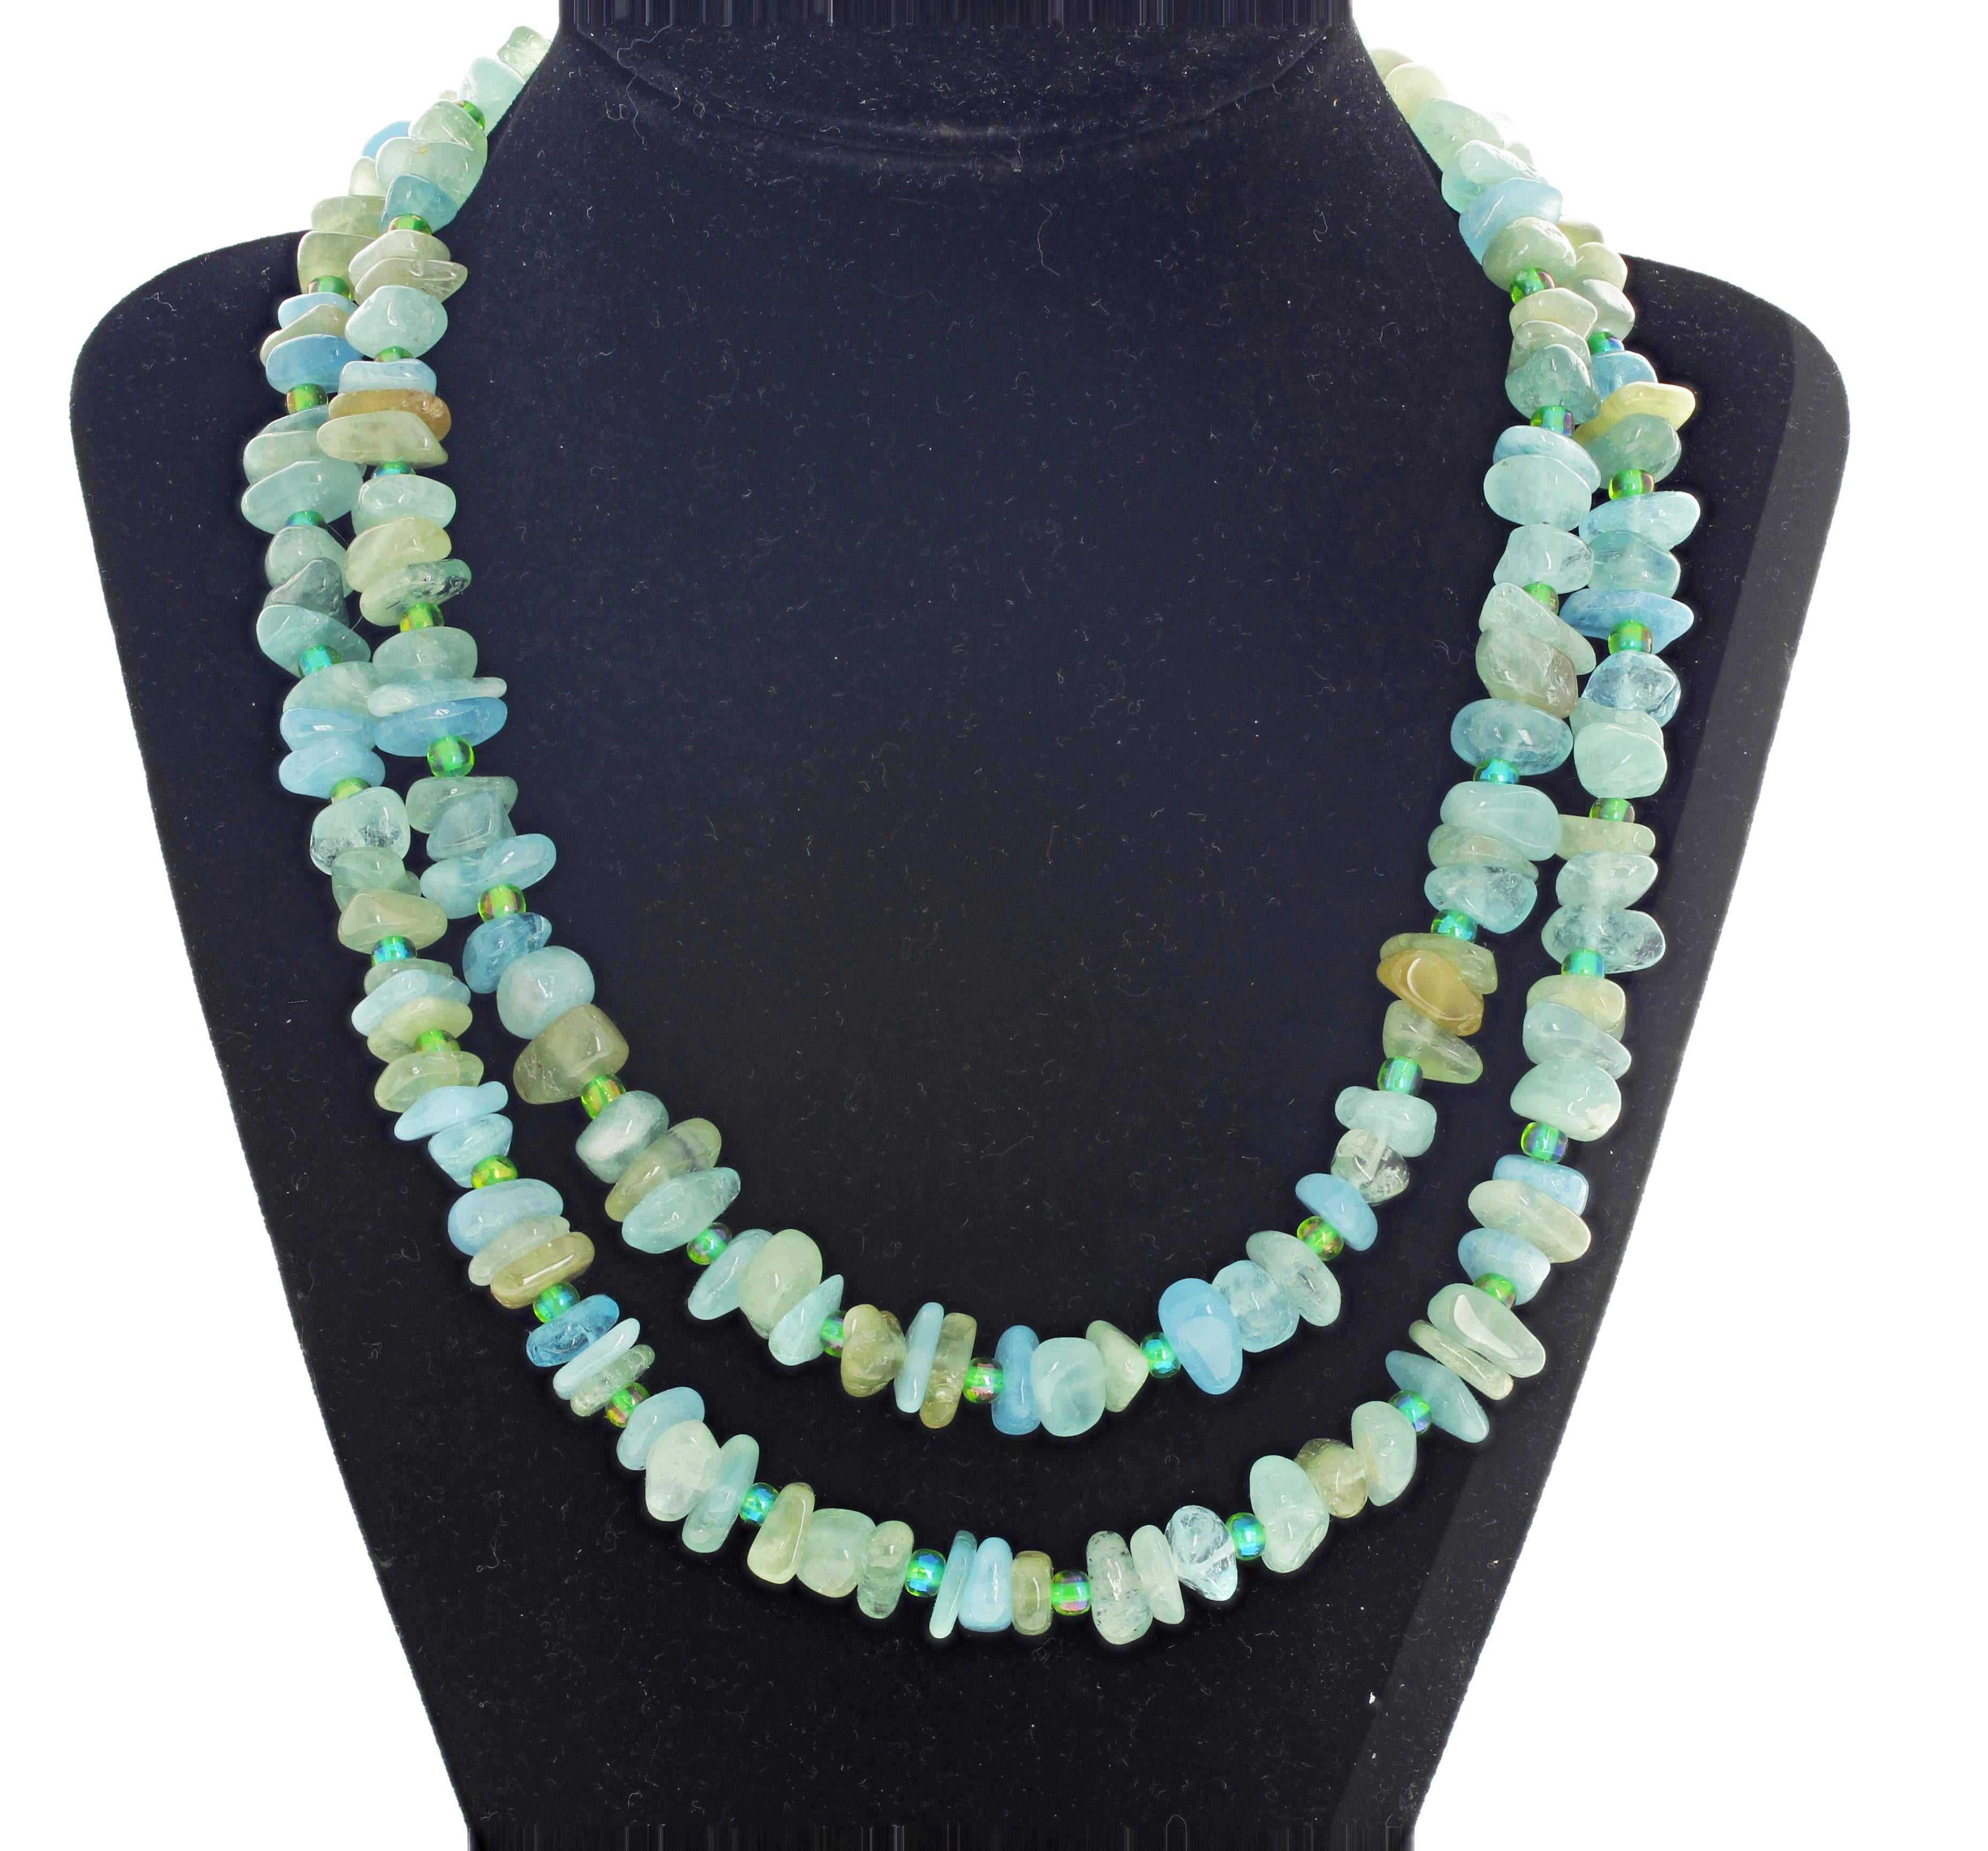 Beautiful glowing double strand of polished natural multi-tone Aquamarine gemstone necklace enhanced with glittering blue-green crystals in a double strand 17.5 inch long necklace with a gold tone clasp.  The Aquamarines are slightly different sizes